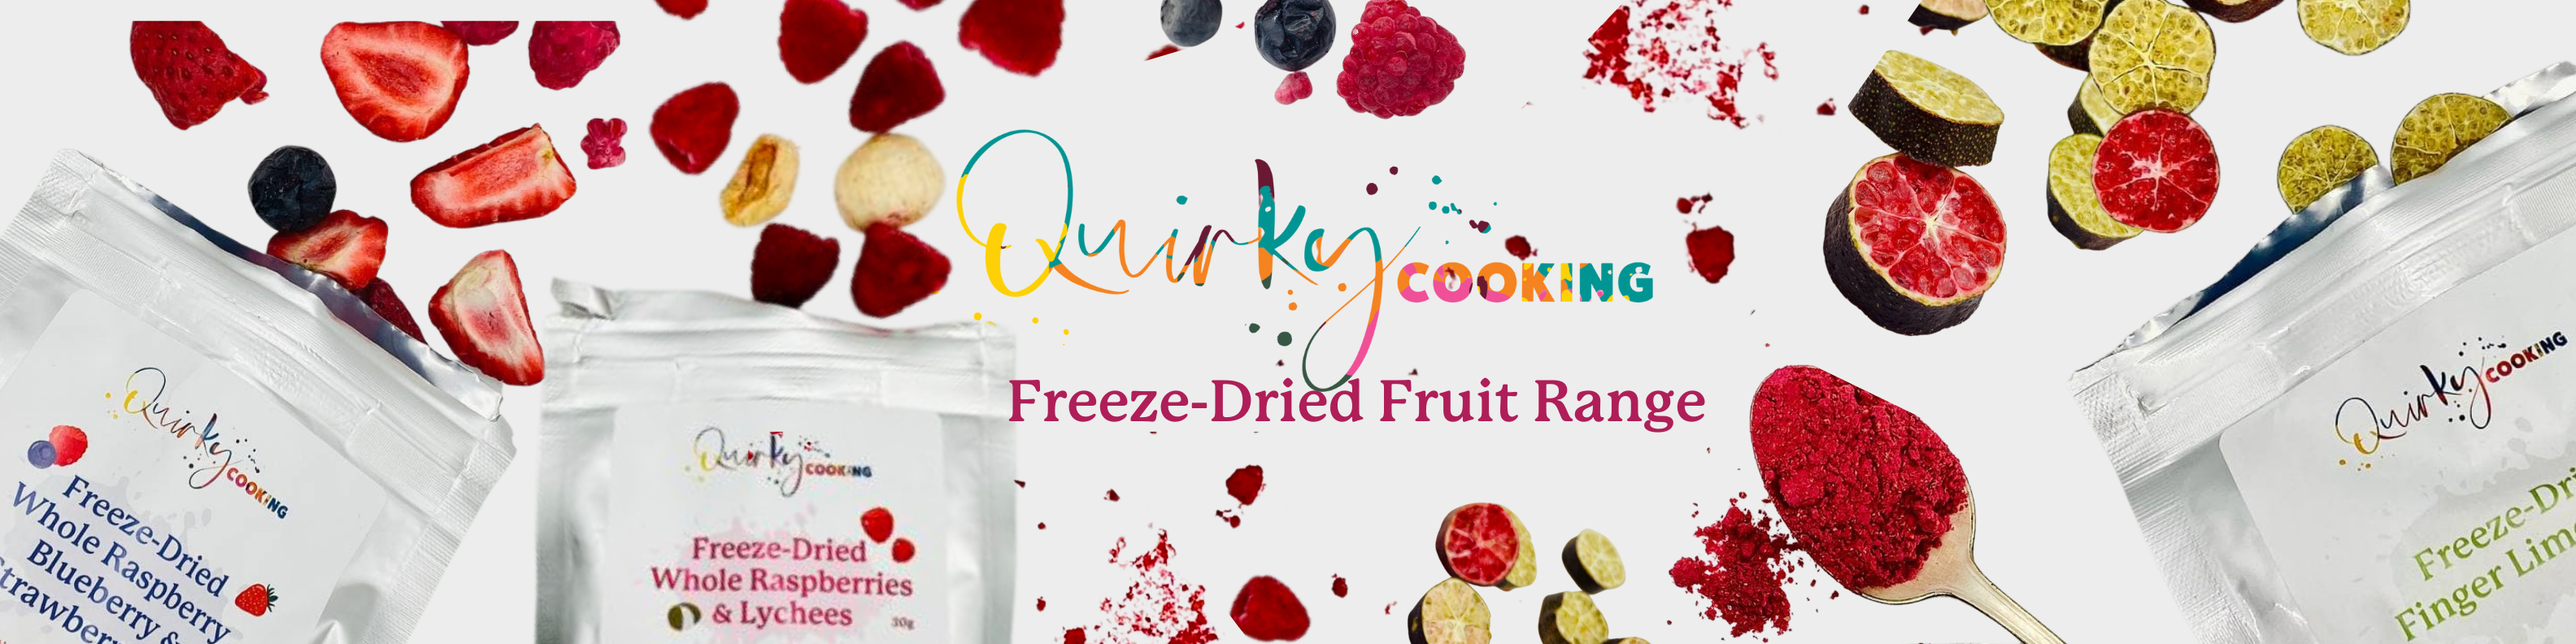 Quirky Cooking, Freeze-Dried Fruit Range